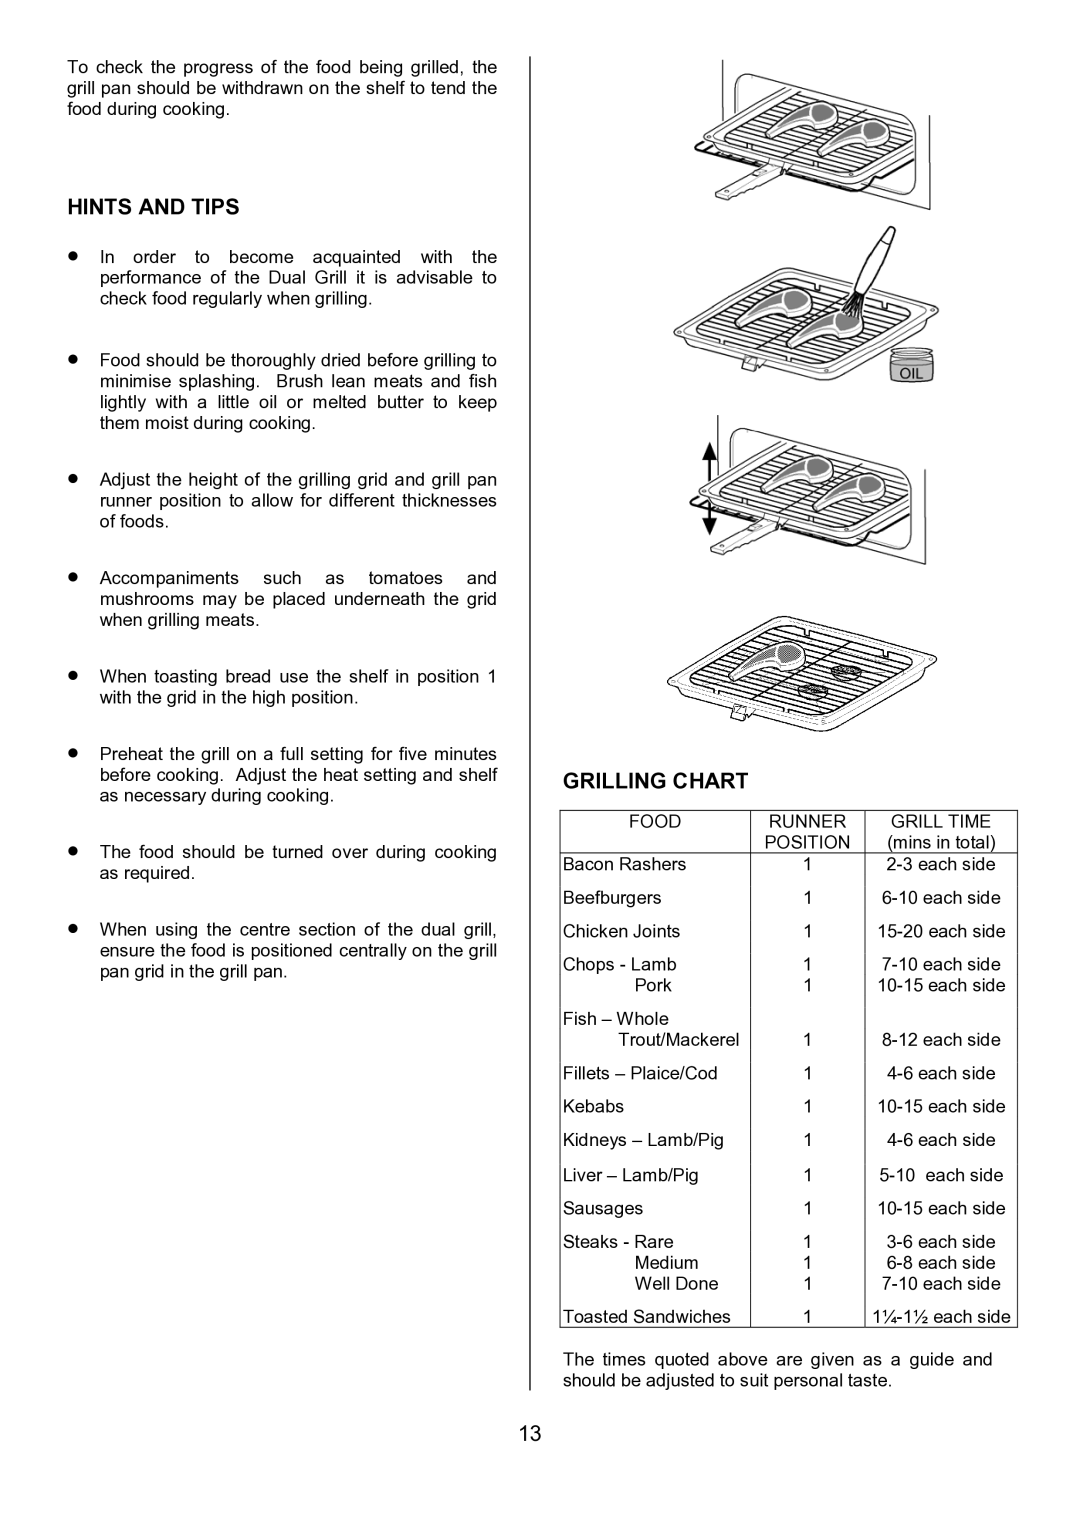 Zanussi ZCE 7551, ZCE 7550 manual Grilling Chart, Food Runner Grill Time Position 